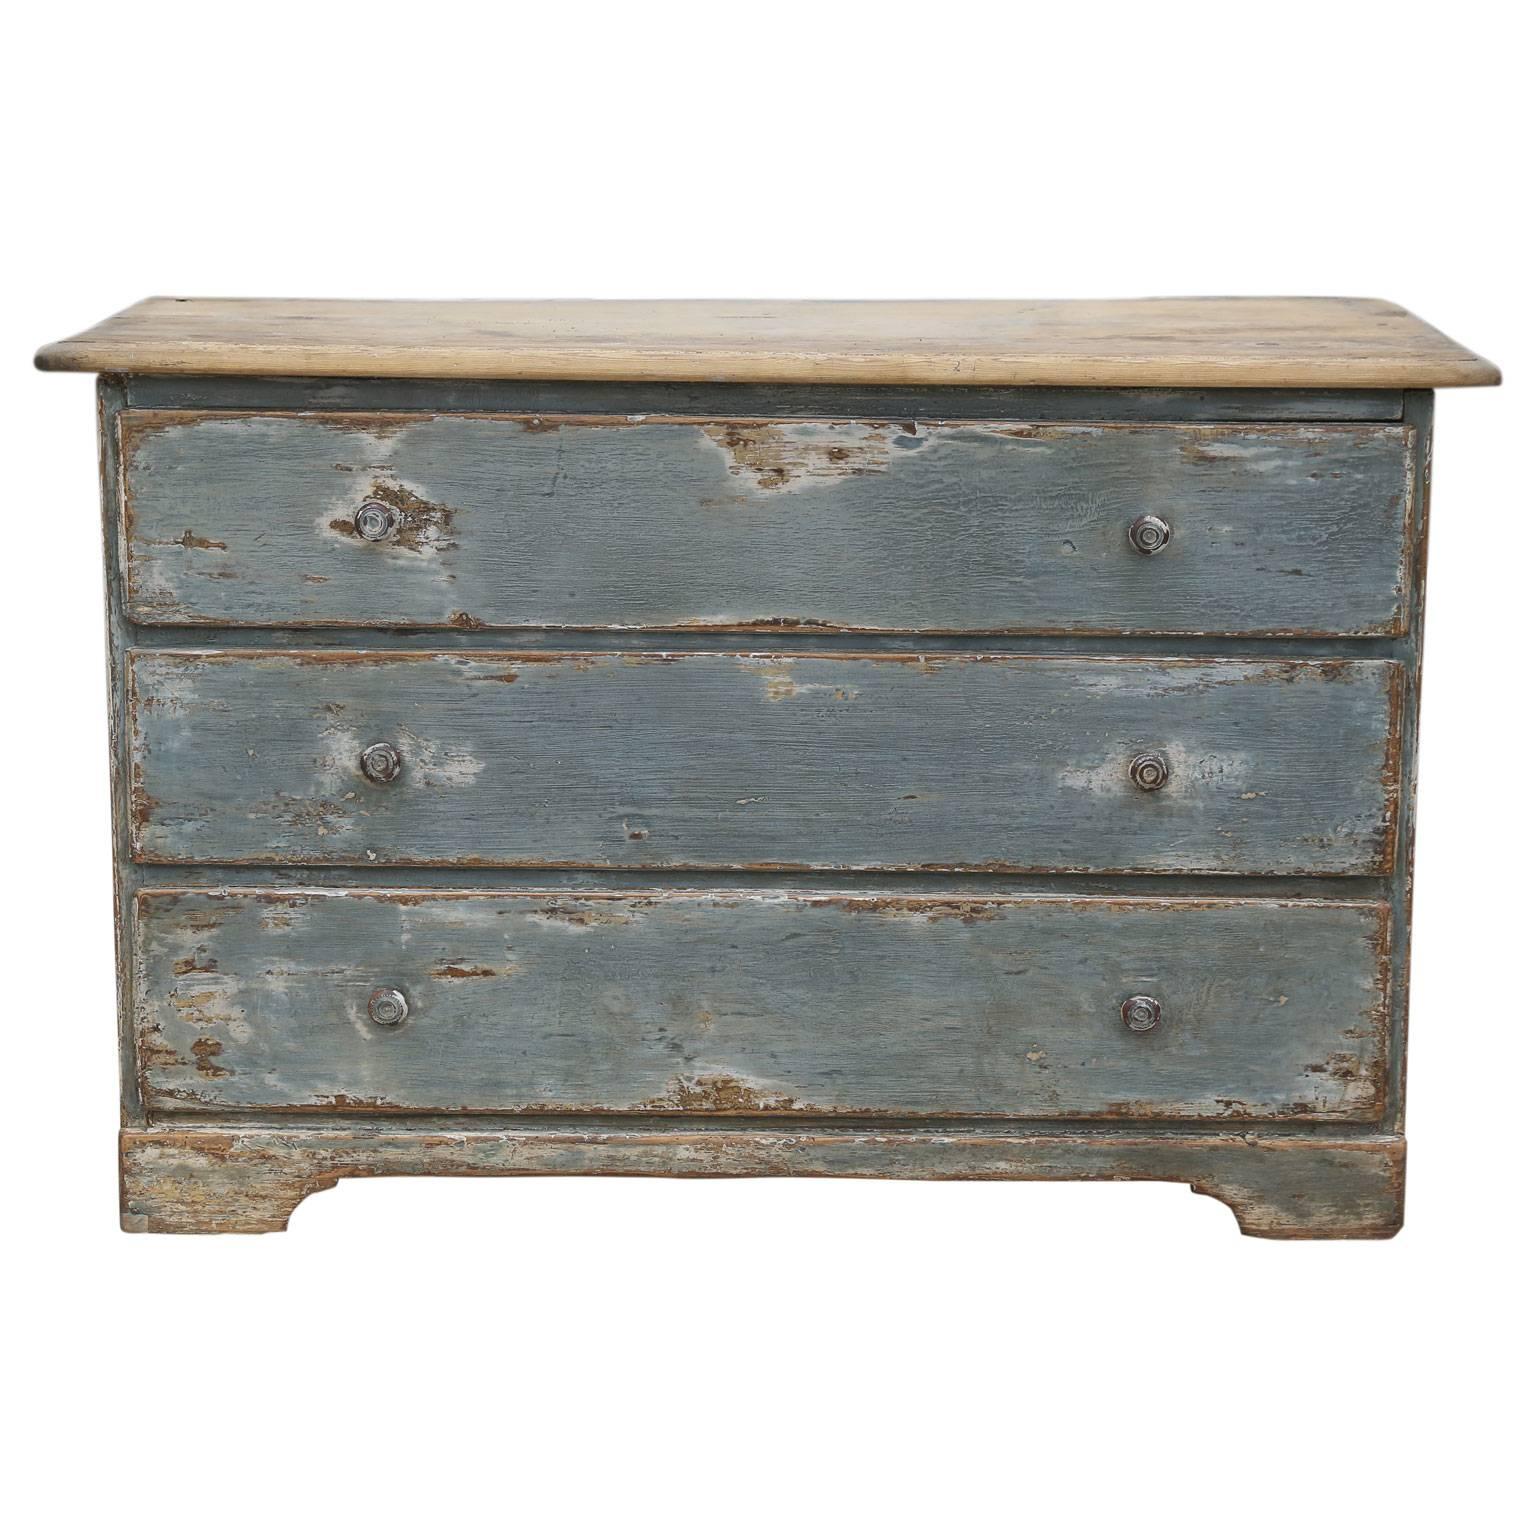 Blue painted commode: 19th century Swedish three-drawer commode with scrubbed top.